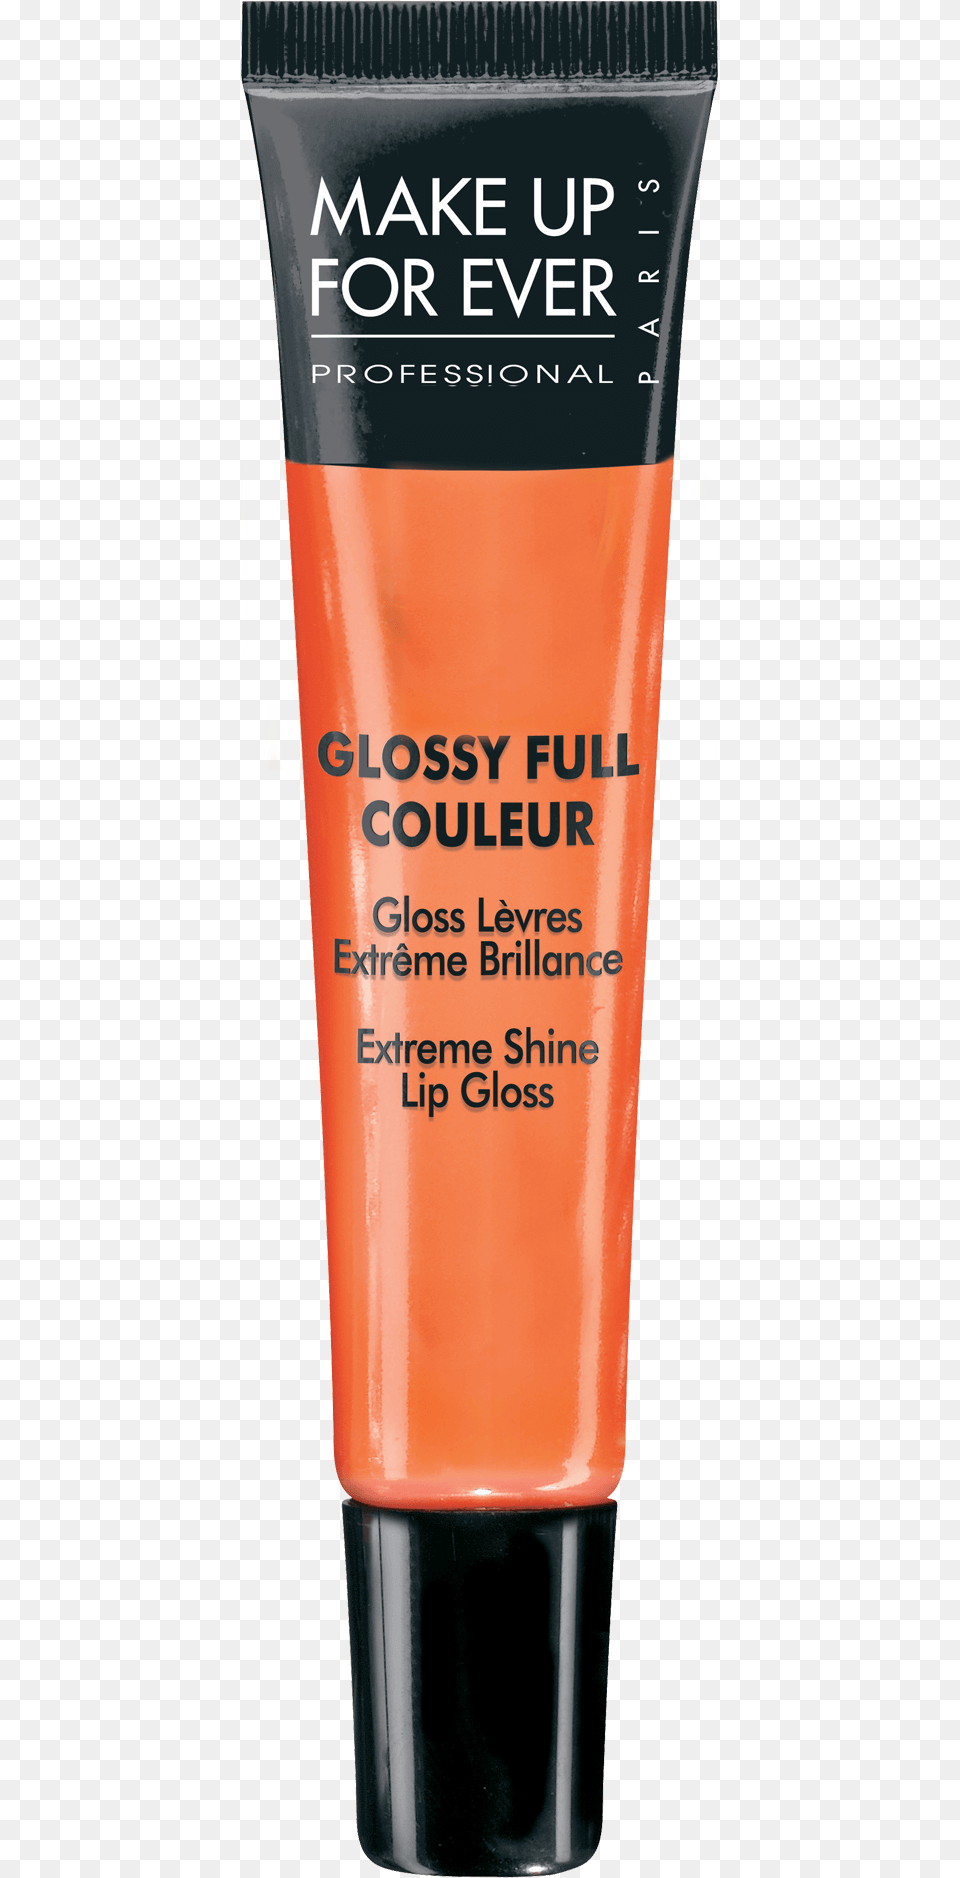 Gloss Make Up Forever, Bottle, Aftershave, Cosmetics Png Image